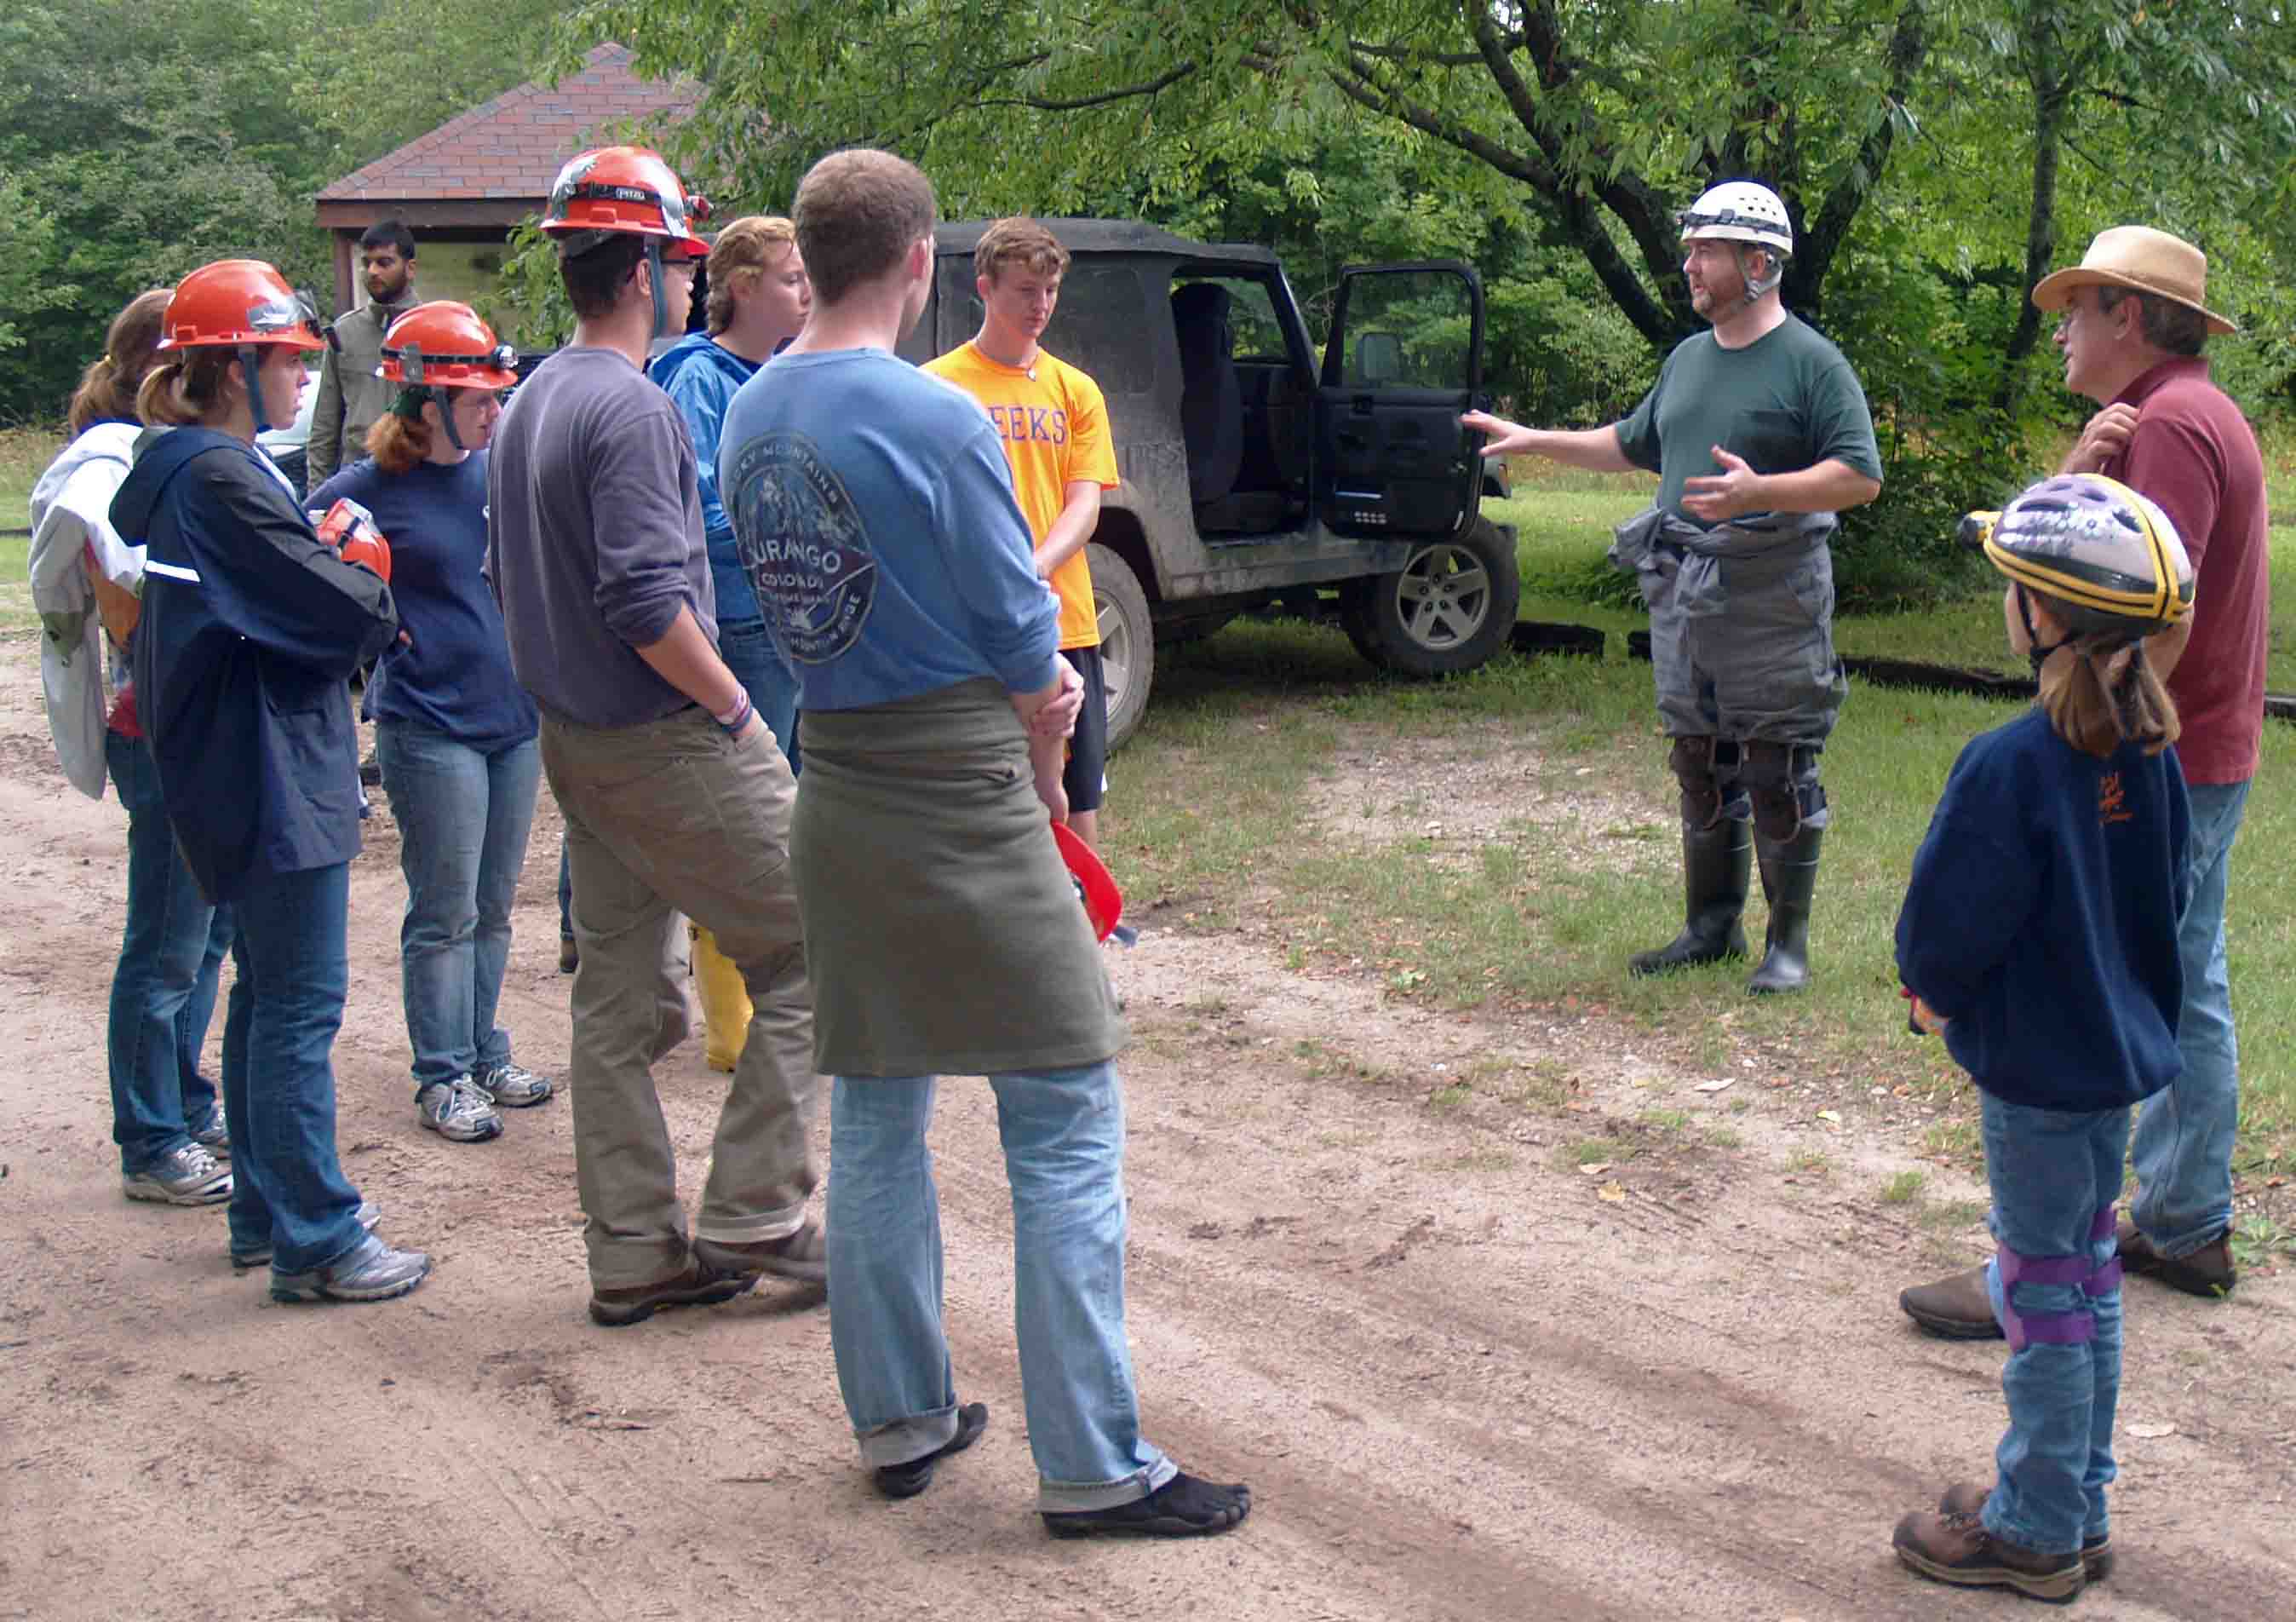 MKC Vice President Tim Deady prepares to lead a group of college students through Hendrie River Water Cave